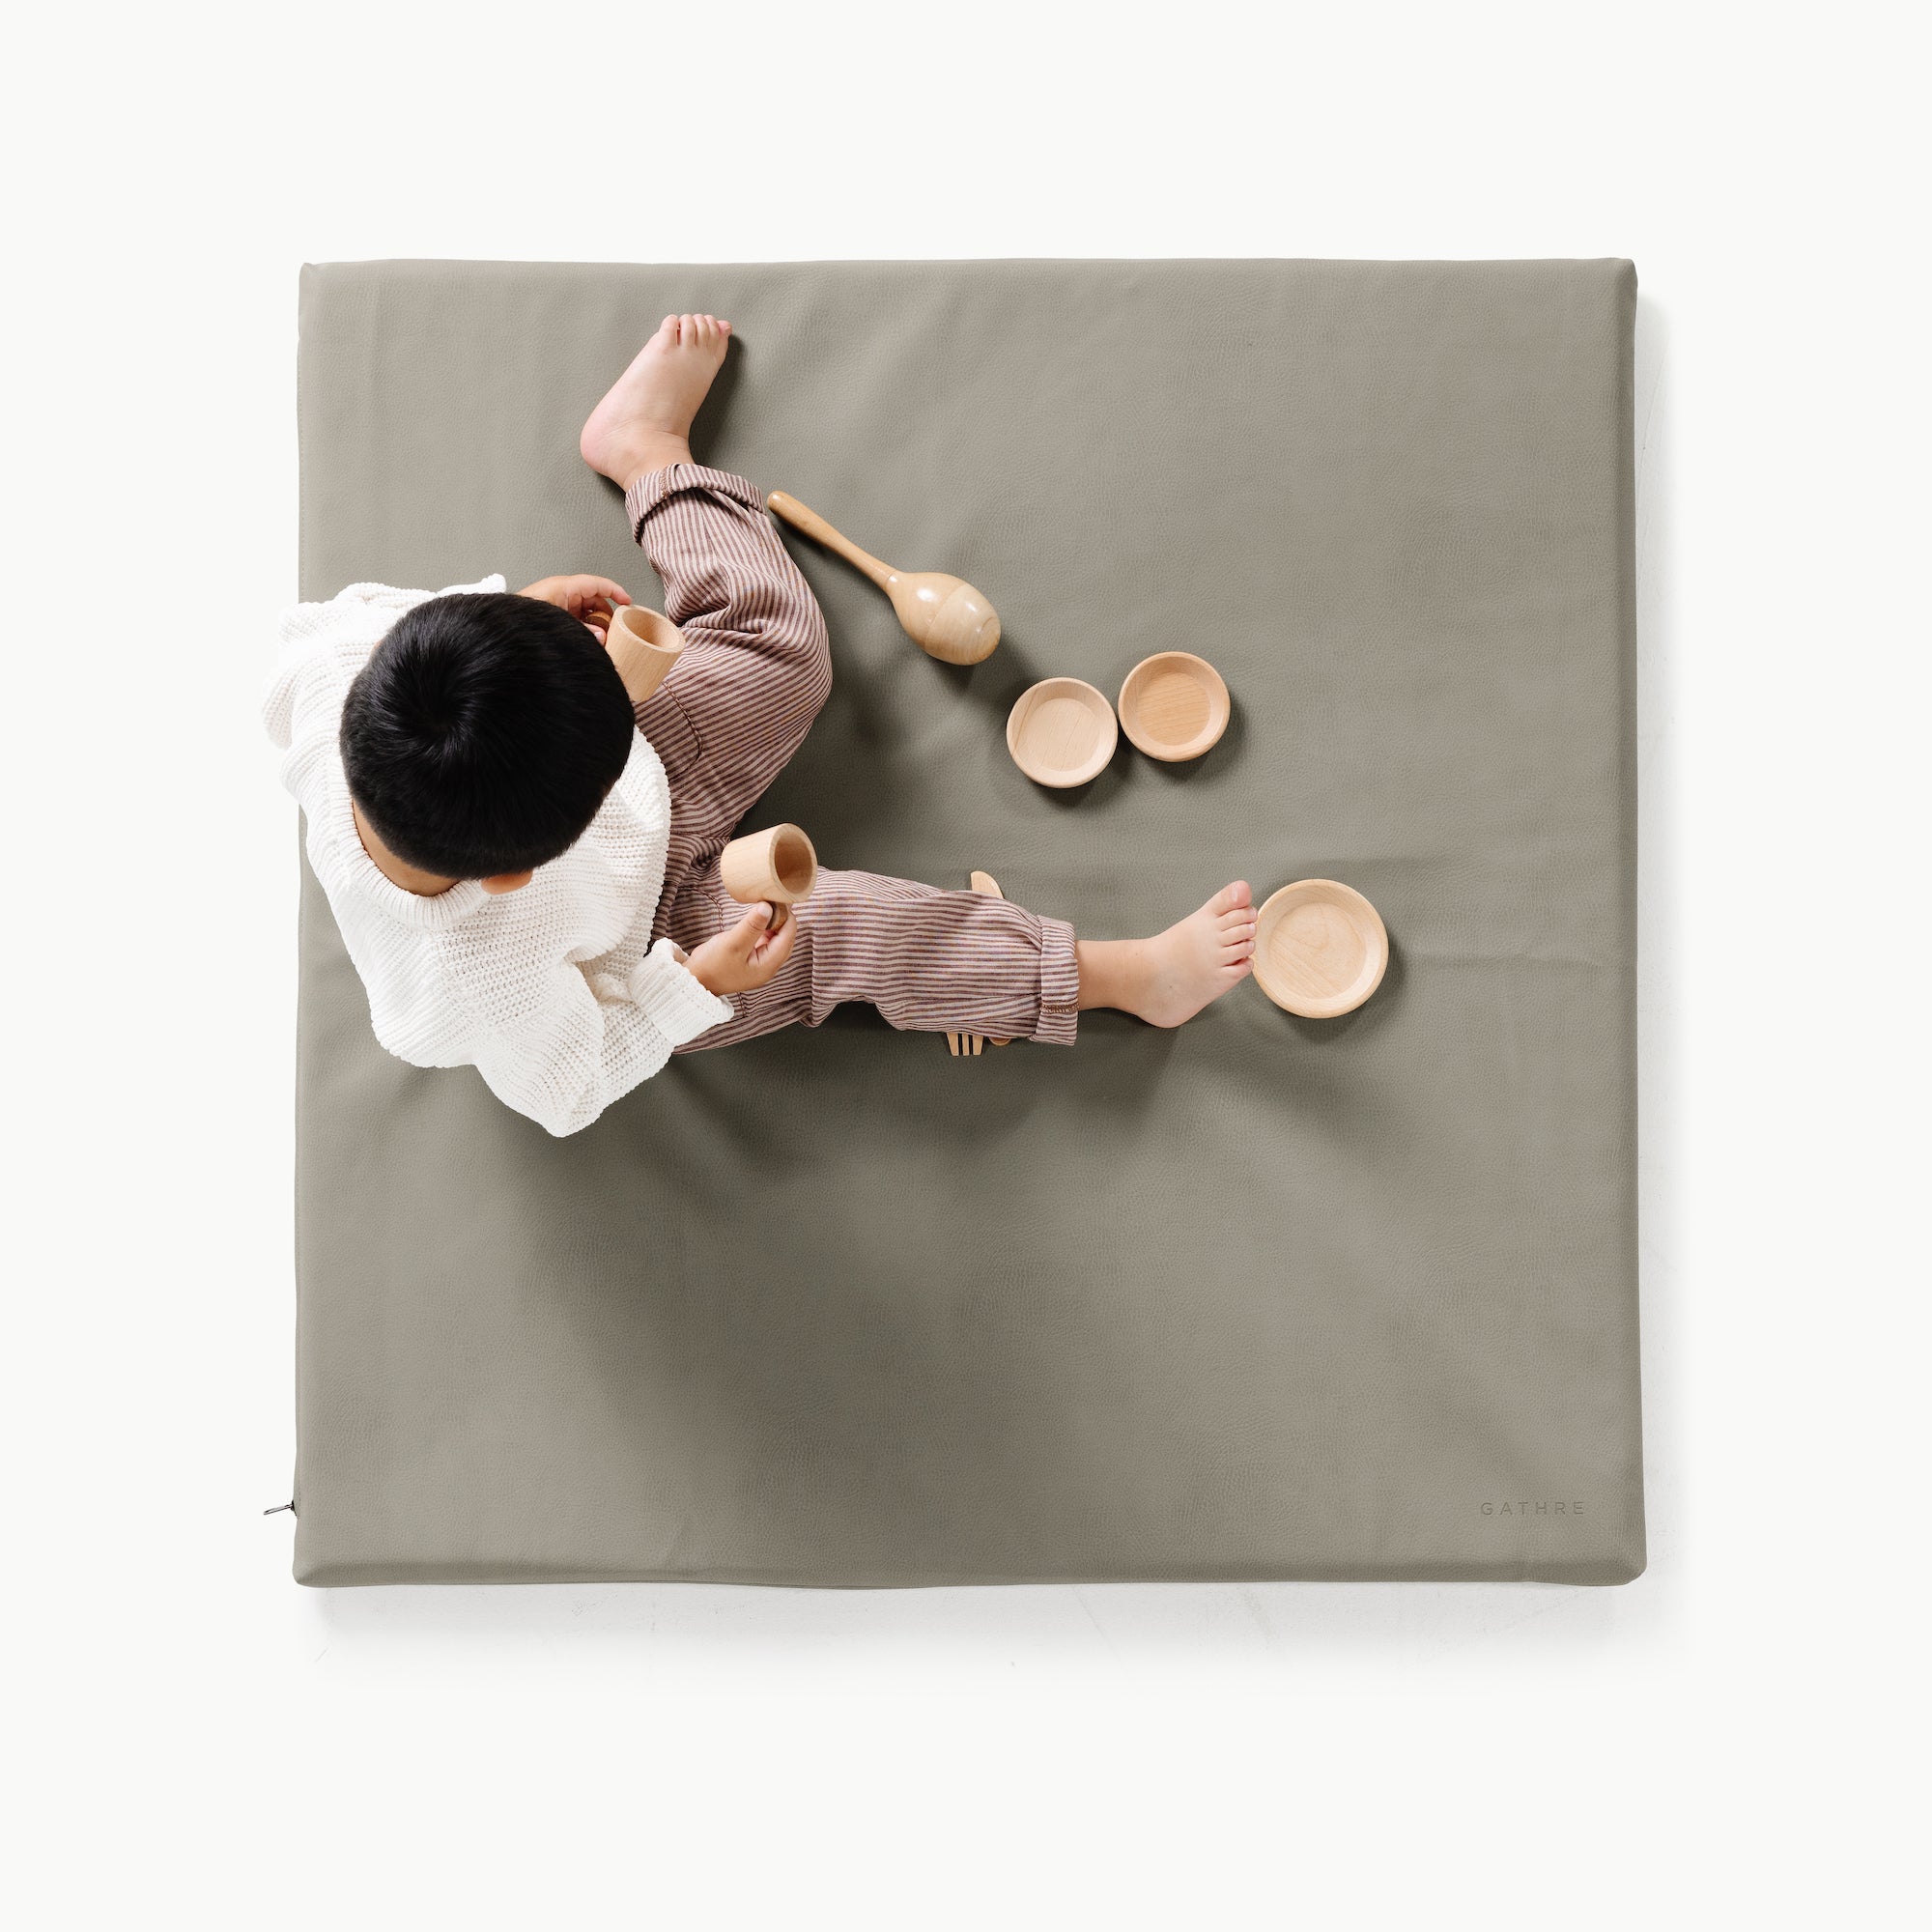 Fern (on sale) / Square@Overhead of kids playing on the Fern Padded Mini Square